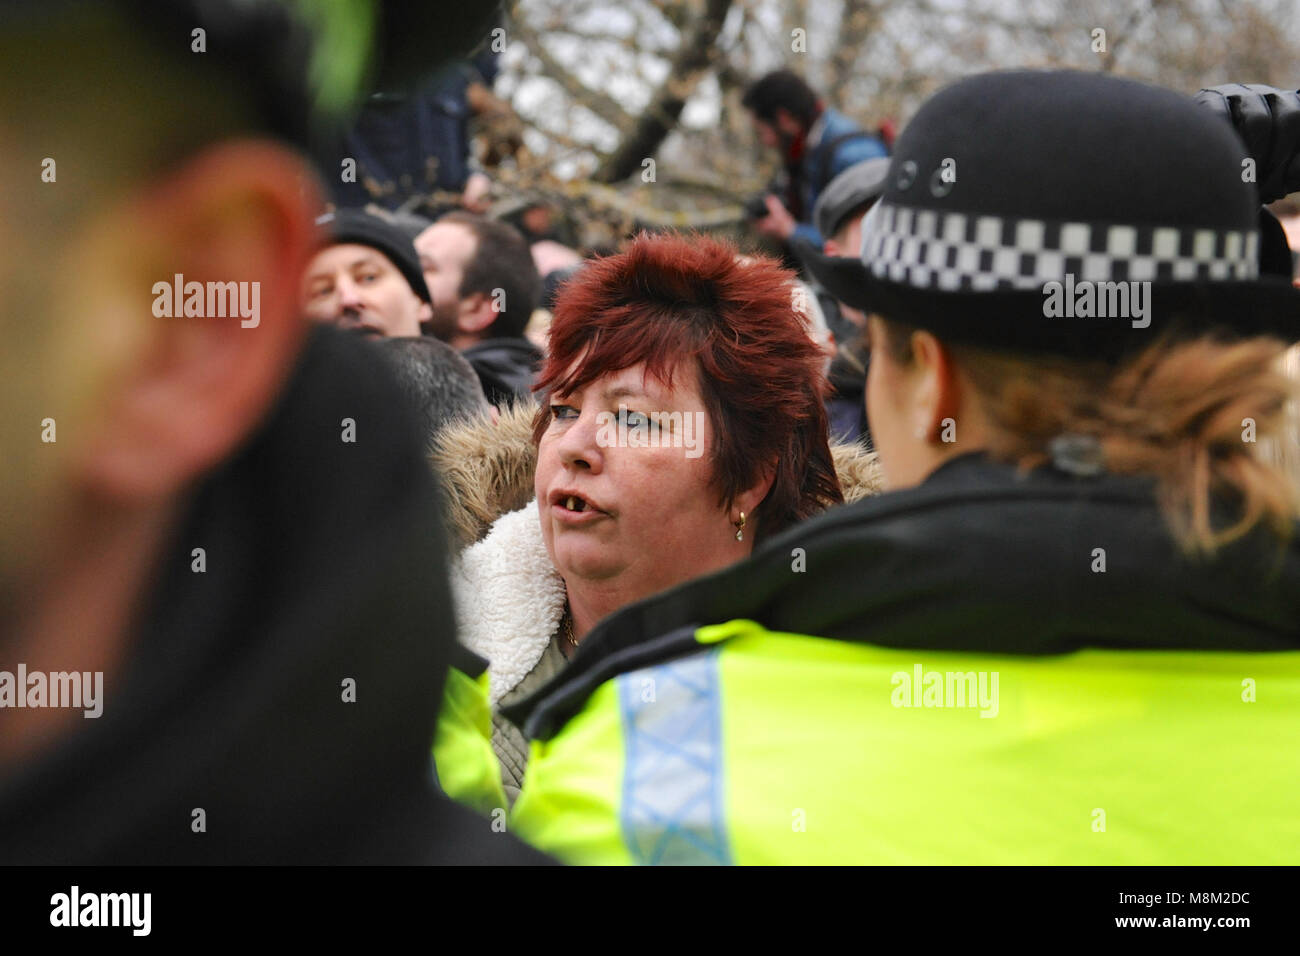 London, UK. 18th March, 2018. A female nationalist demonstrator behind police lines at Speakers Corner prior to the arrival of Tommy Robinson (political activist and co-founder, former spokesman and leader of the English Defence League - EDL), Hyde Park, London, United Kingdom.    The corner was very densely packed with several hundred people which meant that it was virtually impossible for the vast majority of people to actually see him or hear what he was saying. Credit: Michael Preston/Alamy Live News Stock Photo